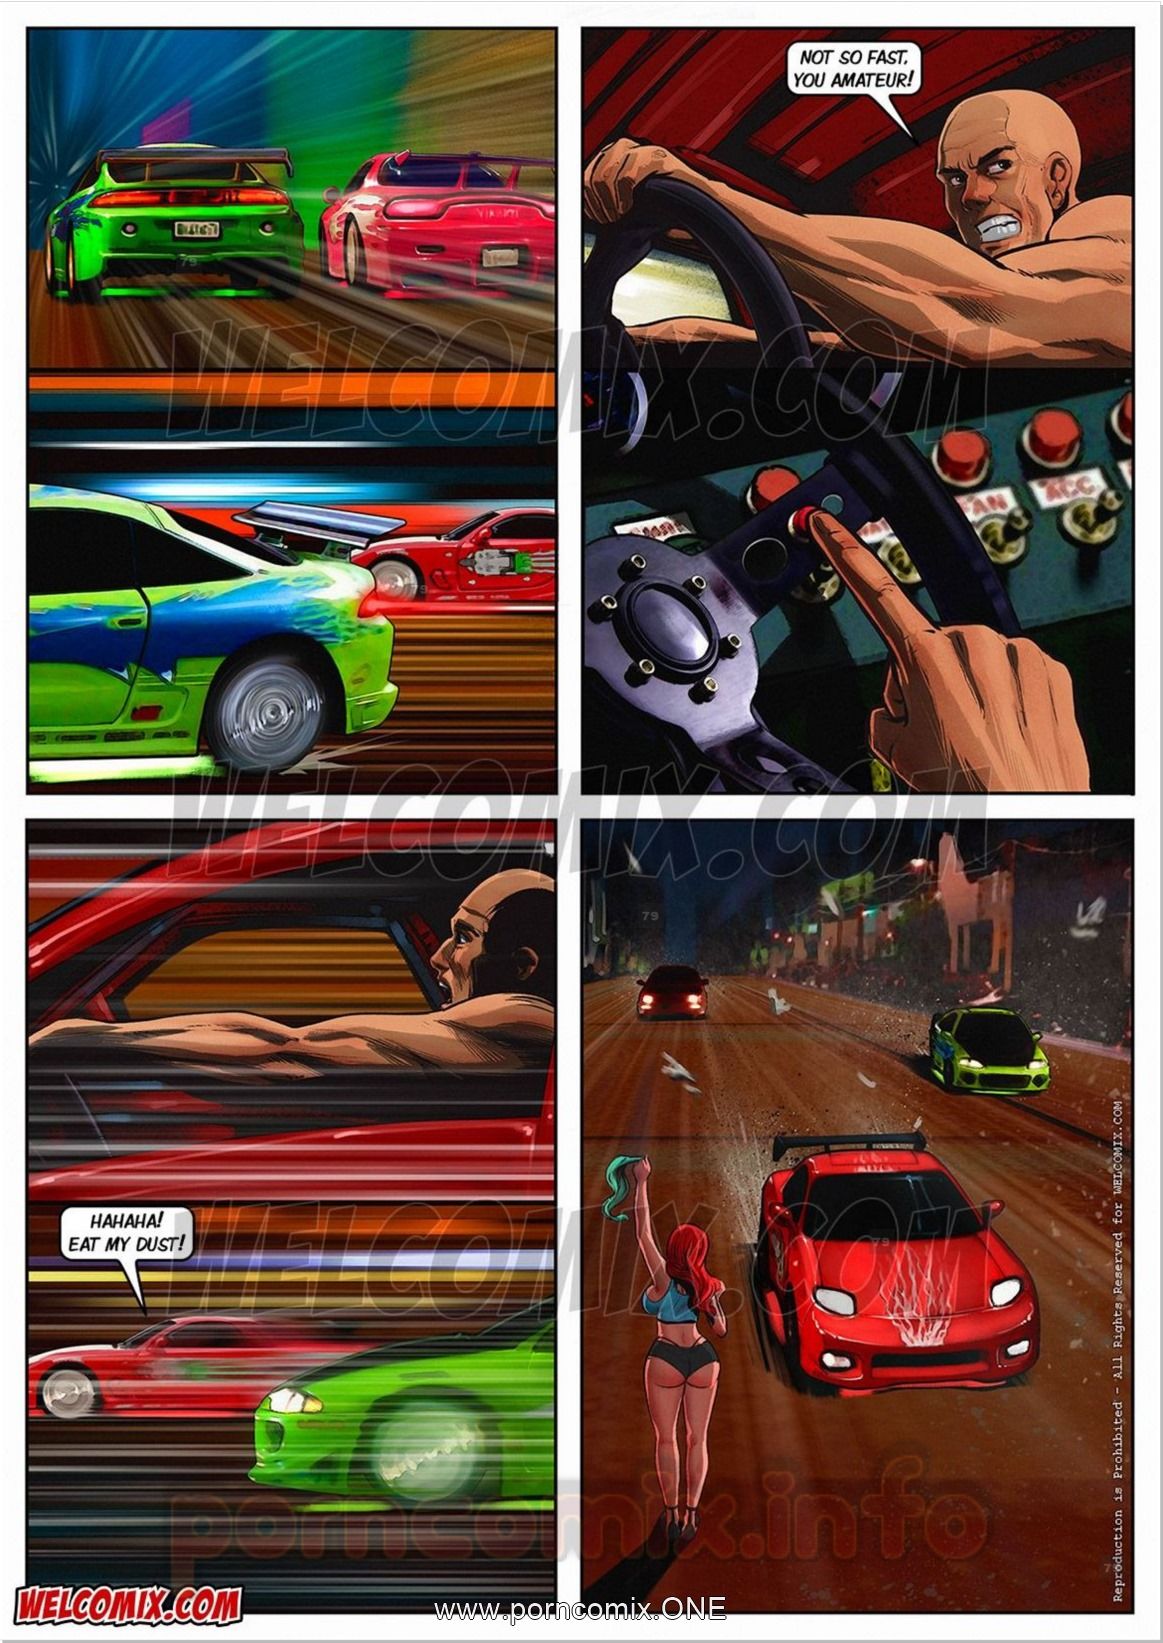 The Fast and the Furious - Welcomix Blockbuster page 6